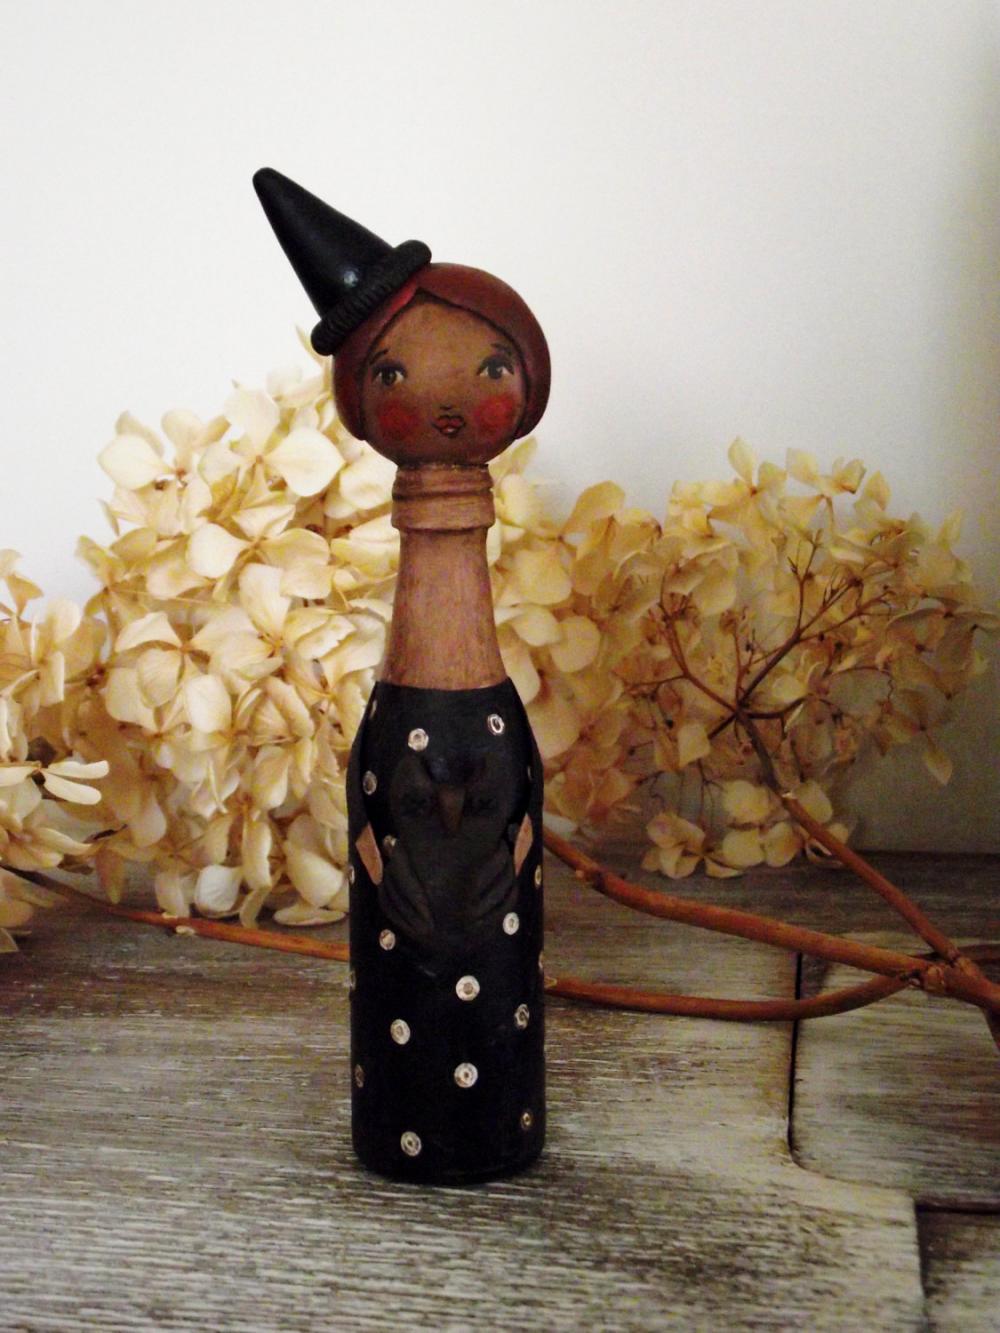 Hilda The Witch - 'bottle Whimsies' Collection Doll